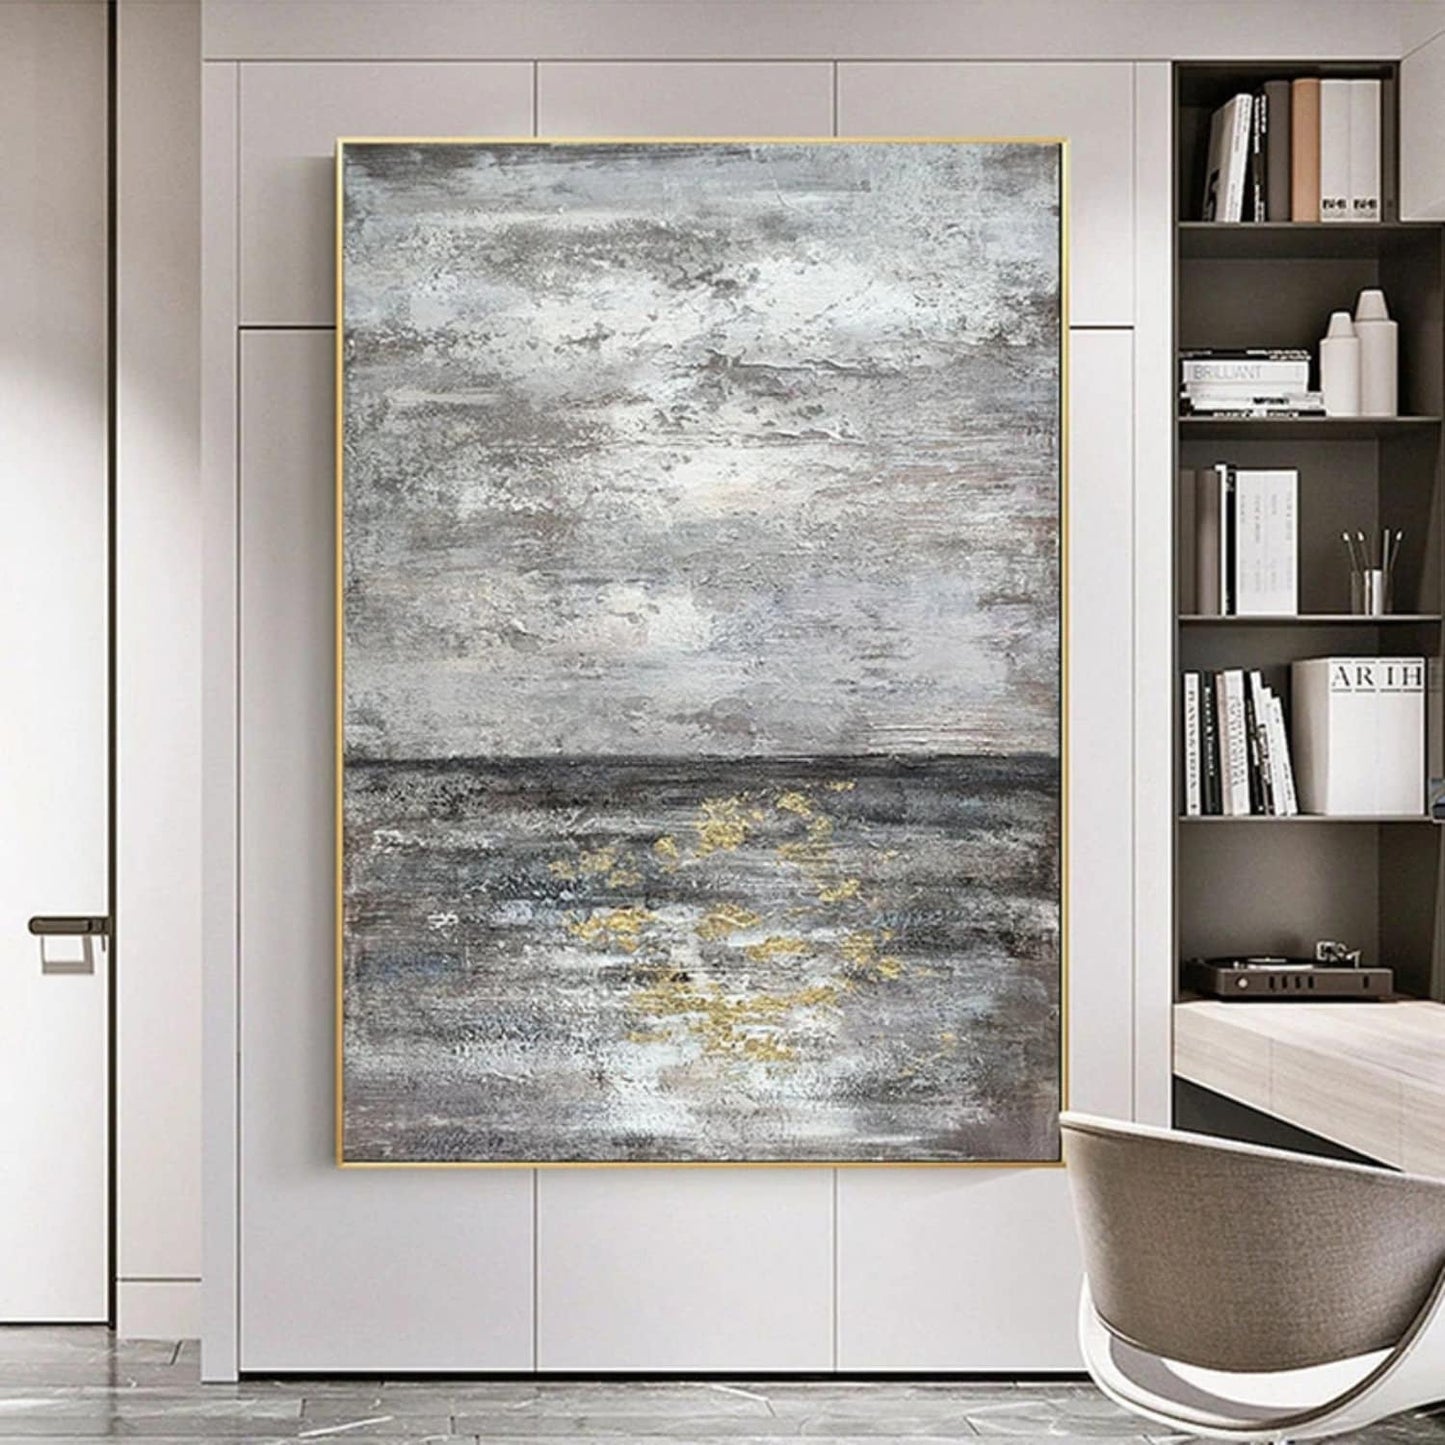 Abstract Silver Skyline Sea Modern Oil Painting